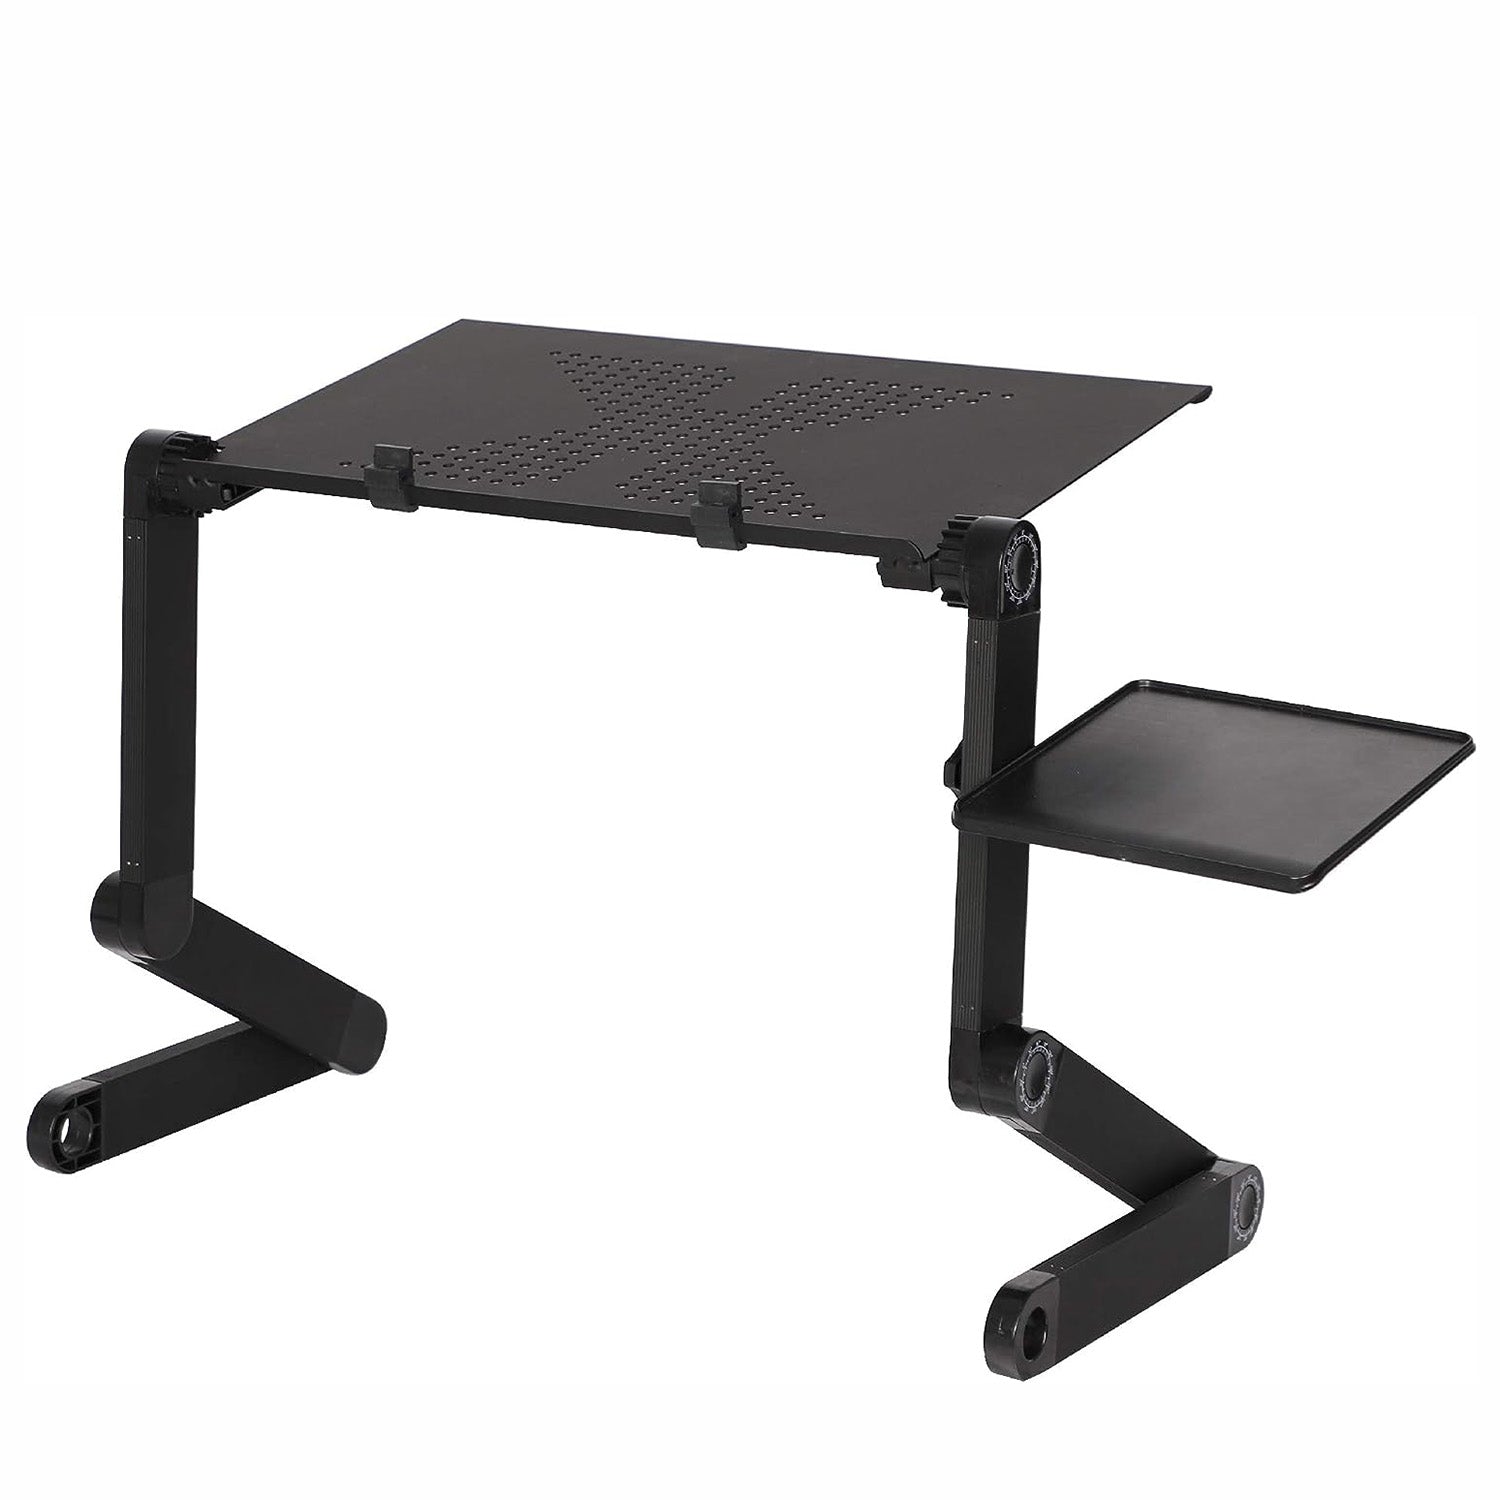 Adjustable Laptop Stand with Heat Emission Hole and Detachable Mouse Pad Portable Folding Laptop Table Up to 17"